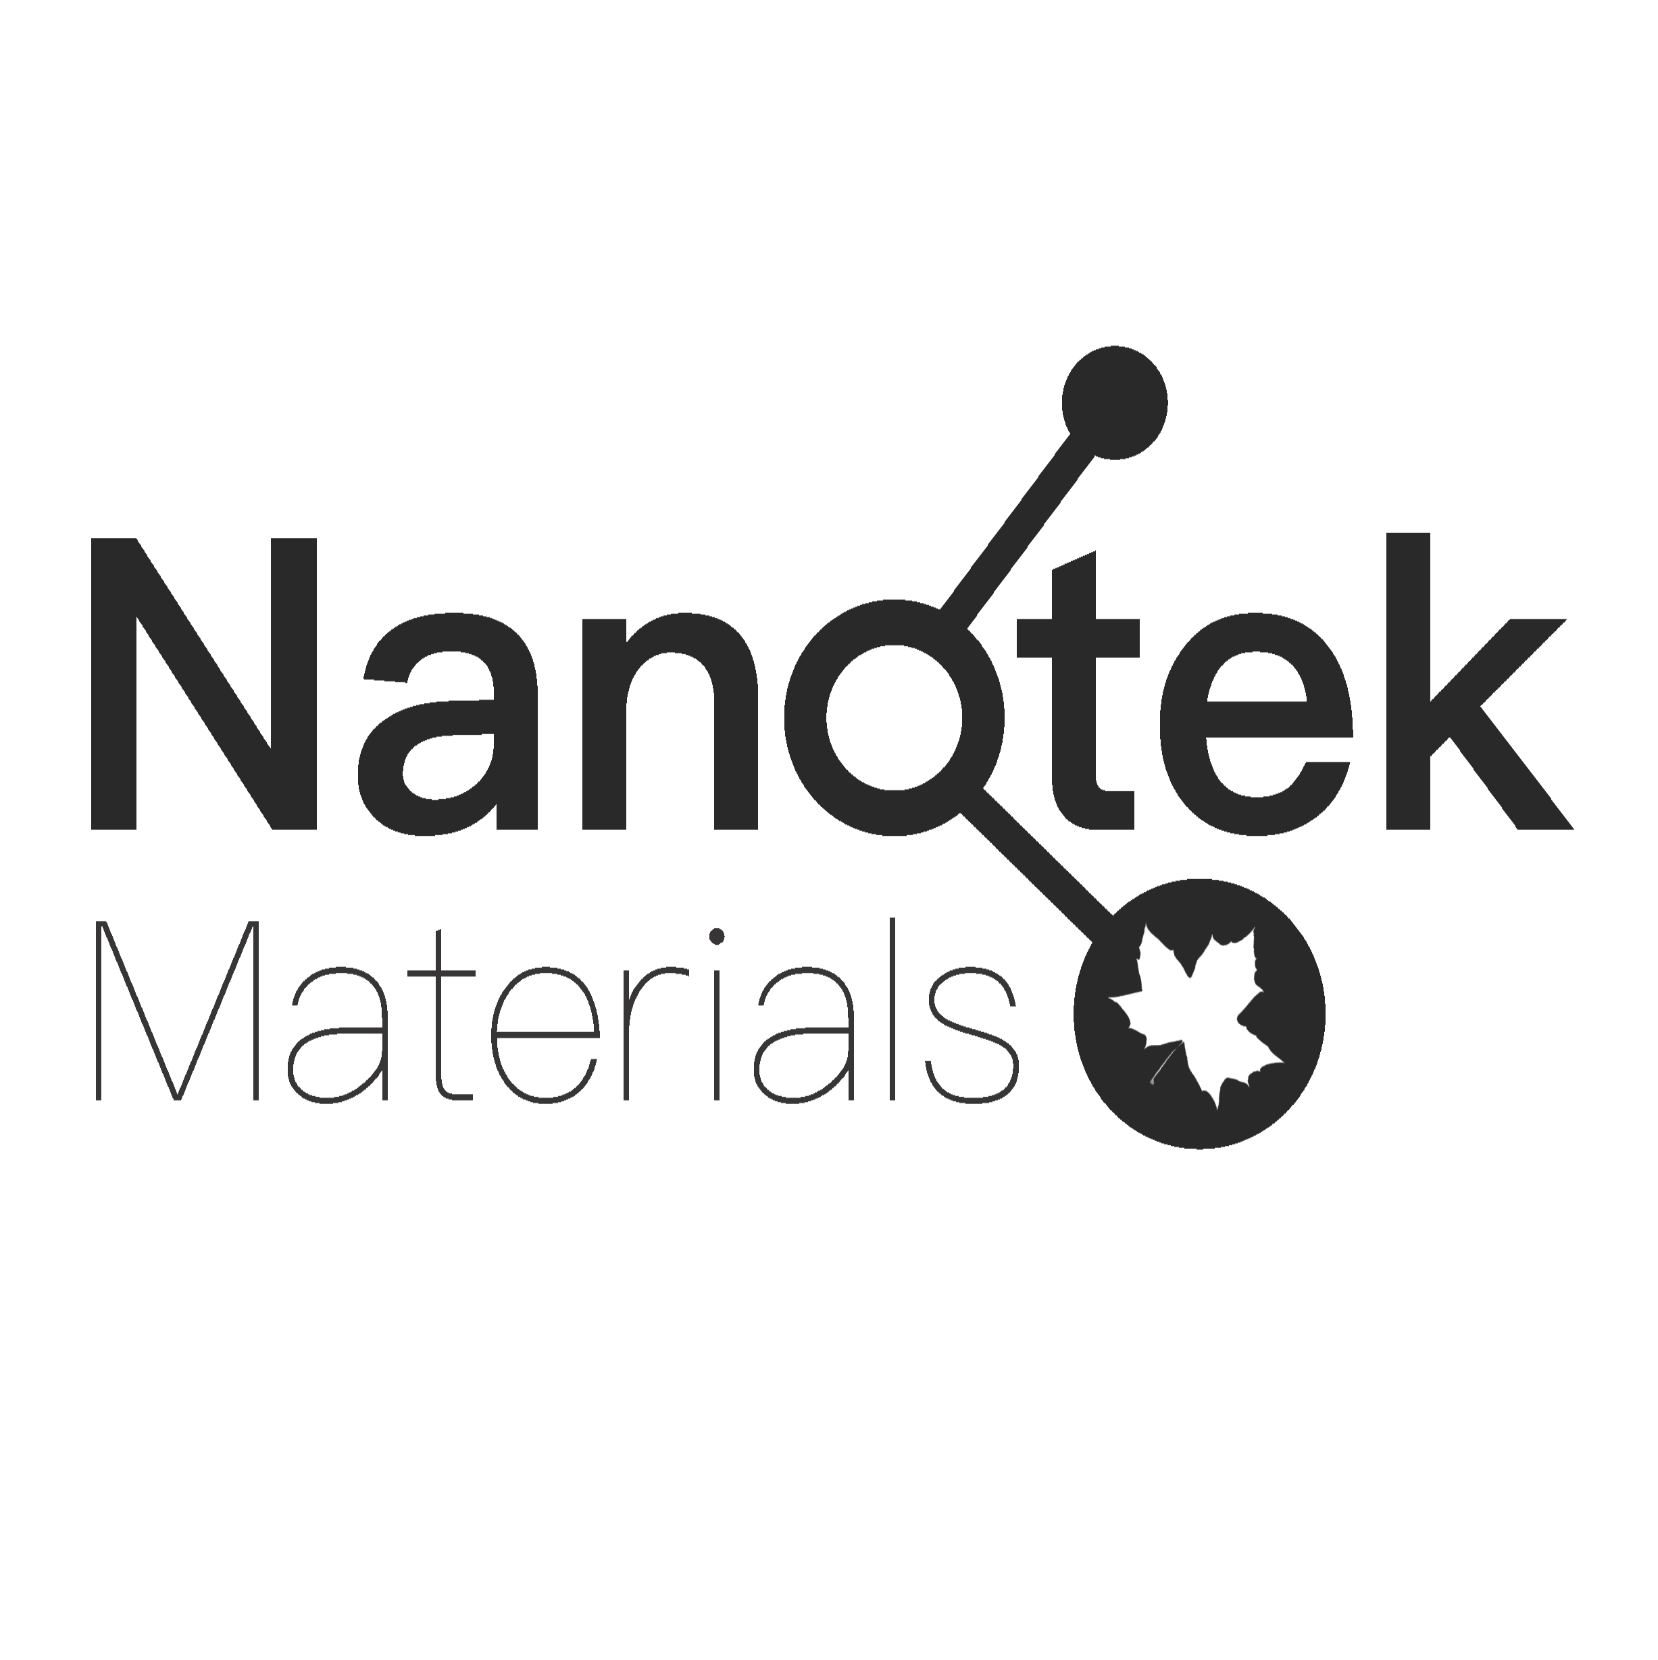 The logo for "Nanotek Materials" reads the company name in black. "Nanotek" is in bold and underneath reads "Materials" in regular font. 